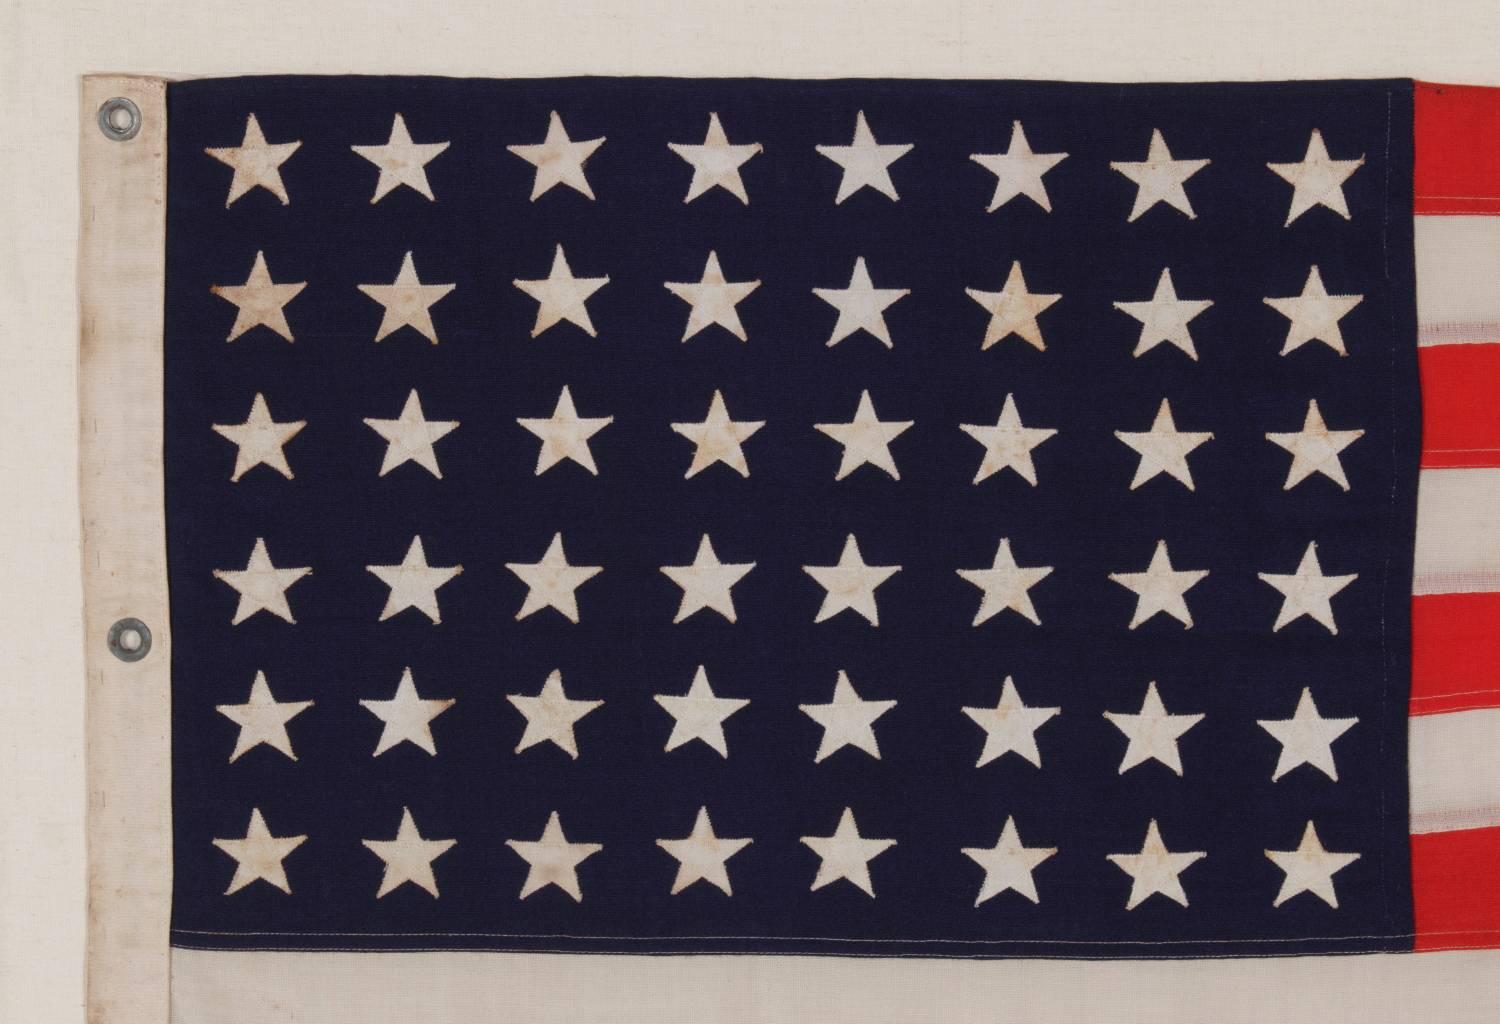 48 STAR FLAG & MATCHING COMMISSIONING PENNANT OF THE WWII ERA, SELDOM EVER FOUND IN A MATCHING PAIR, BROUGHT HOME BY U.S. NAVY AMPHIBIOUS FORCES GROUP SAILOR LUTHER VOIGHT LINGLE, WHO SERVED ON THE U.S.S. REEVES, THE FIRST AMERICAN SHIP TO DROP